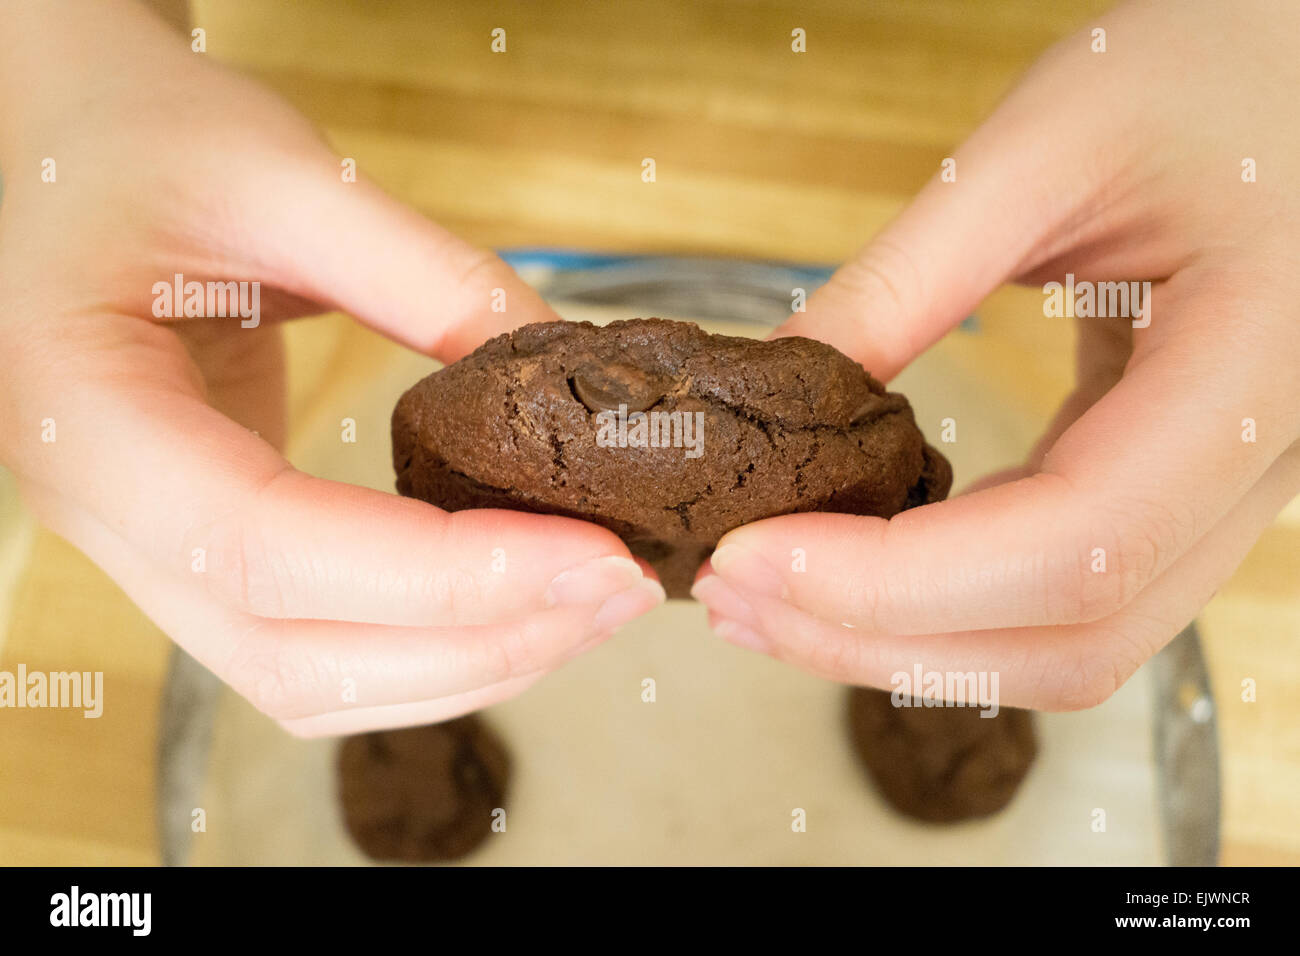 hand holding chocolate cookie home made Stock Photo